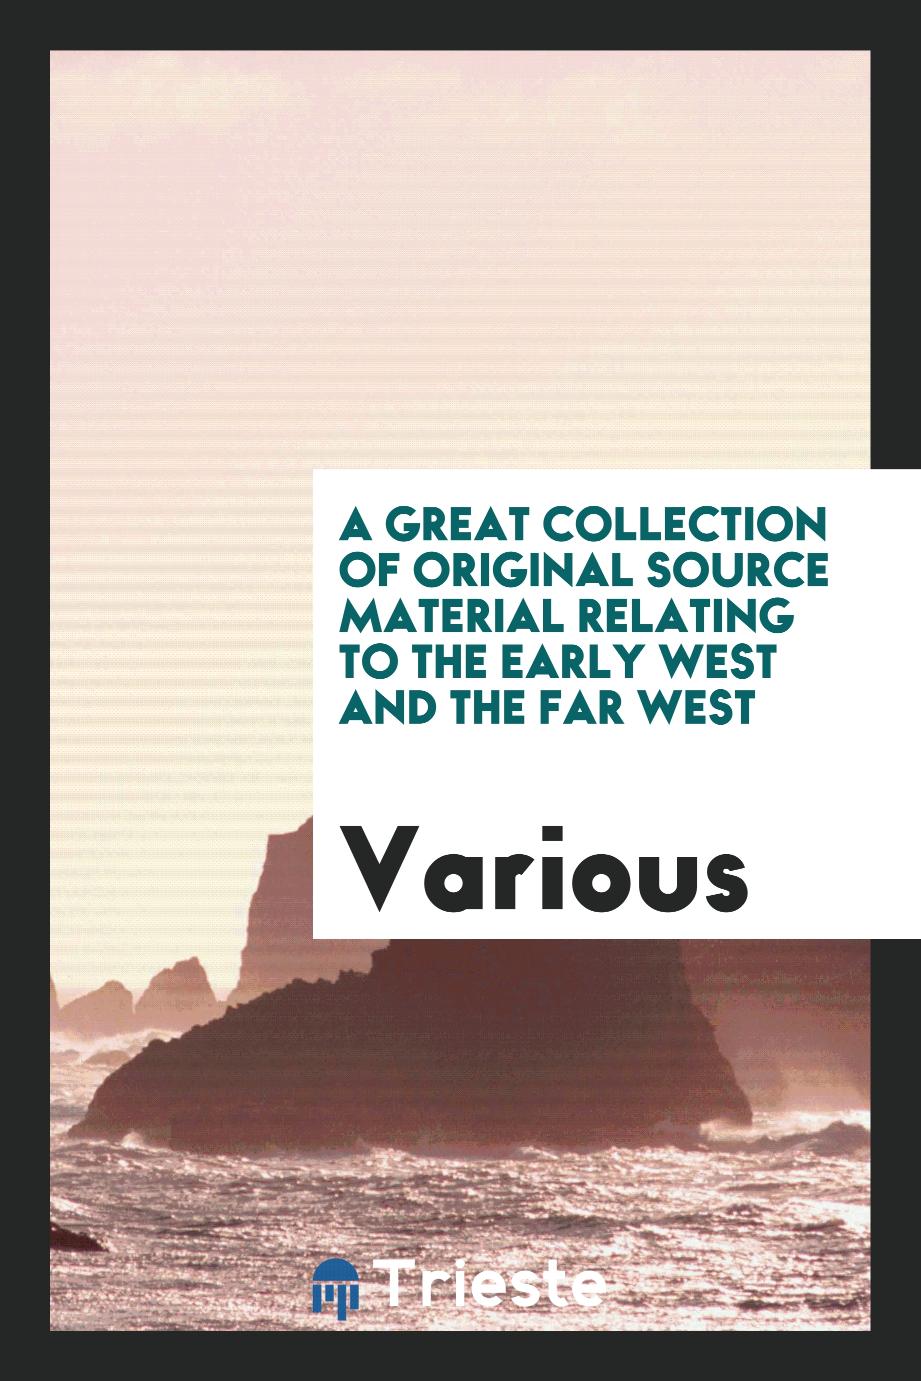 A great collection of original source material relating to the early West and the Far West